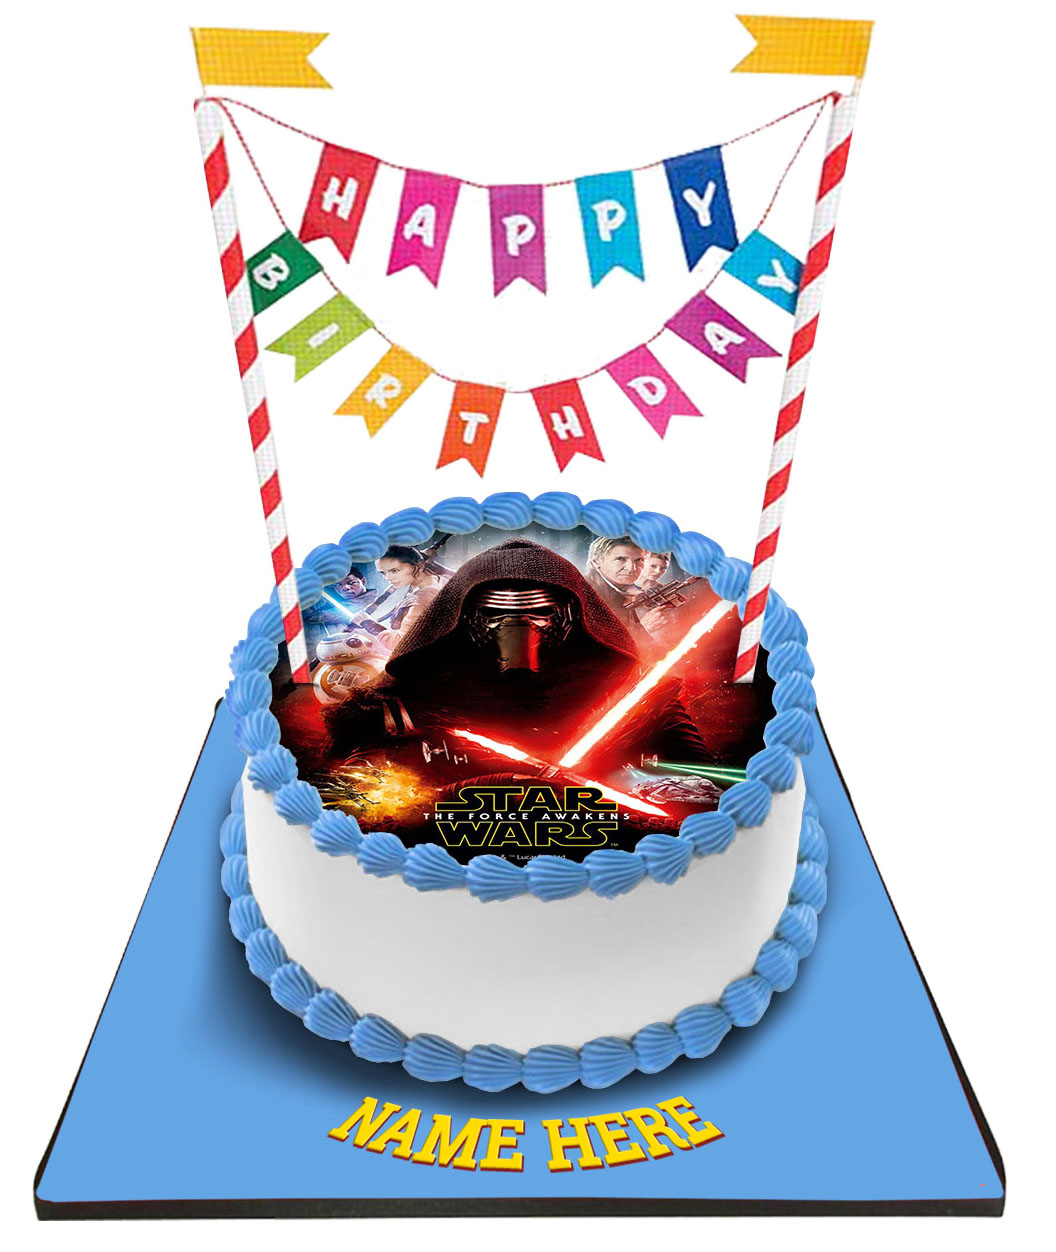 Star Wars Cake with Happy Birthday Bunting